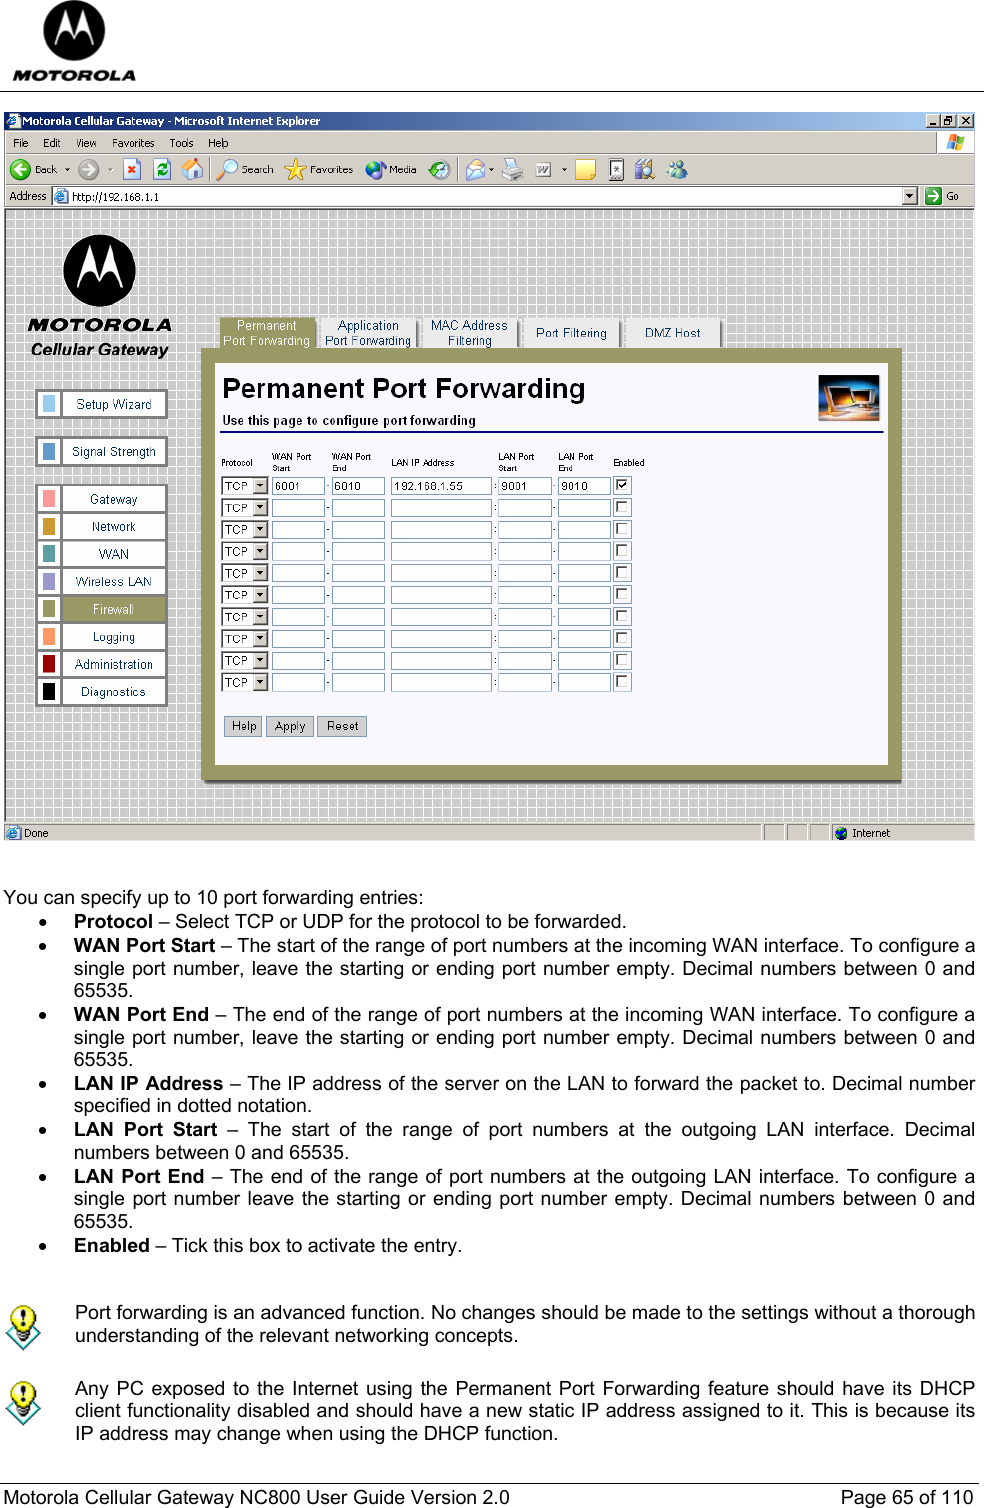  Motorola Cellular Gateway NC800 User Guide Version 2.0     Page 65 of 110    You can specify up to 10 port forwarding entries: • Protocol – Select TCP or UDP for the protocol to be forwarded. • WAN Port Start – The start of the range of port numbers at the incoming WAN interface. To configure a single port number, leave the starting or ending port number empty. Decimal numbers between 0 and 65535. • WAN Port End – The end of the range of port numbers at the incoming WAN interface. To configure a single port number, leave the starting or ending port number empty. Decimal numbers between 0 and 65535. • LAN IP Address – The IP address of the server on the LAN to forward the packet to. Decimal number specified in dotted notation.   • LAN Port Start – The start of the range of port numbers at the outgoing LAN interface. Decimal numbers between 0 and 65535. • LAN Port End – The end of the range of port numbers at the outgoing LAN interface. To configure a single port number leave the starting or ending port number empty. Decimal numbers between 0 and 65535. • Enabled – Tick this box to activate the entry.    Port forwarding is an advanced function. No changes should be made to the settings without a thorough understanding of the relevant networking concepts.   Any PC exposed to the Internet using the Permanent Port Forwarding feature should have its DHCP client functionality disabled and should have a new static IP address assigned to it. This is because its IP address may change when using the DHCP function.  